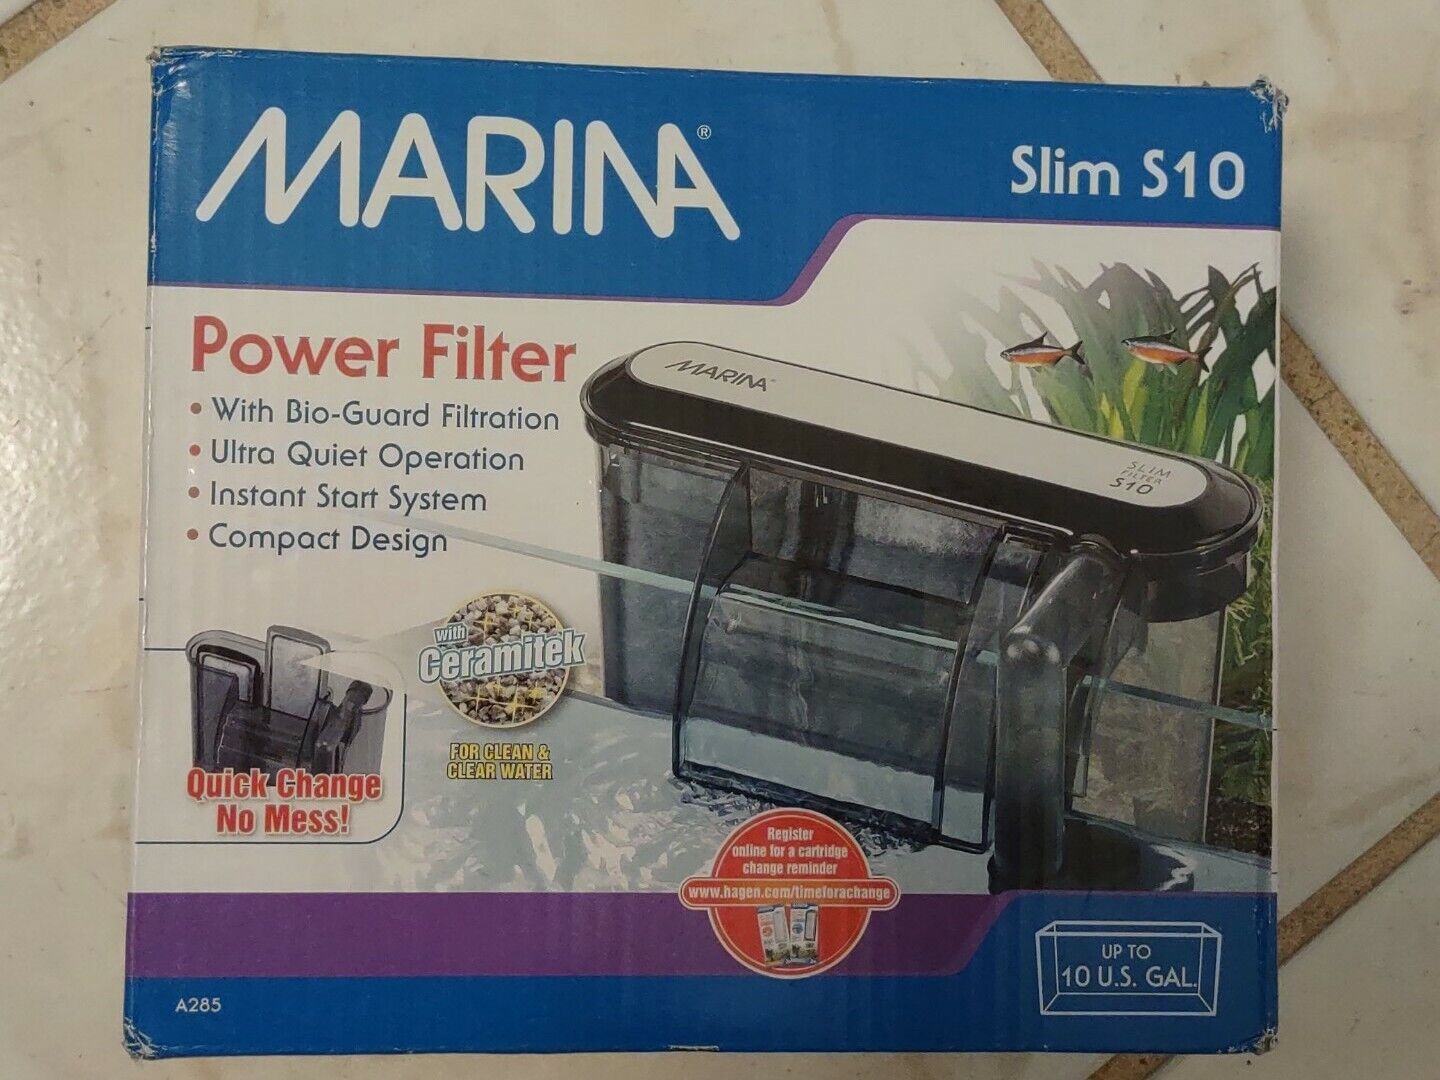 Compact and Slim S10 Marina Power Filter for aquariums up to 10 gallons